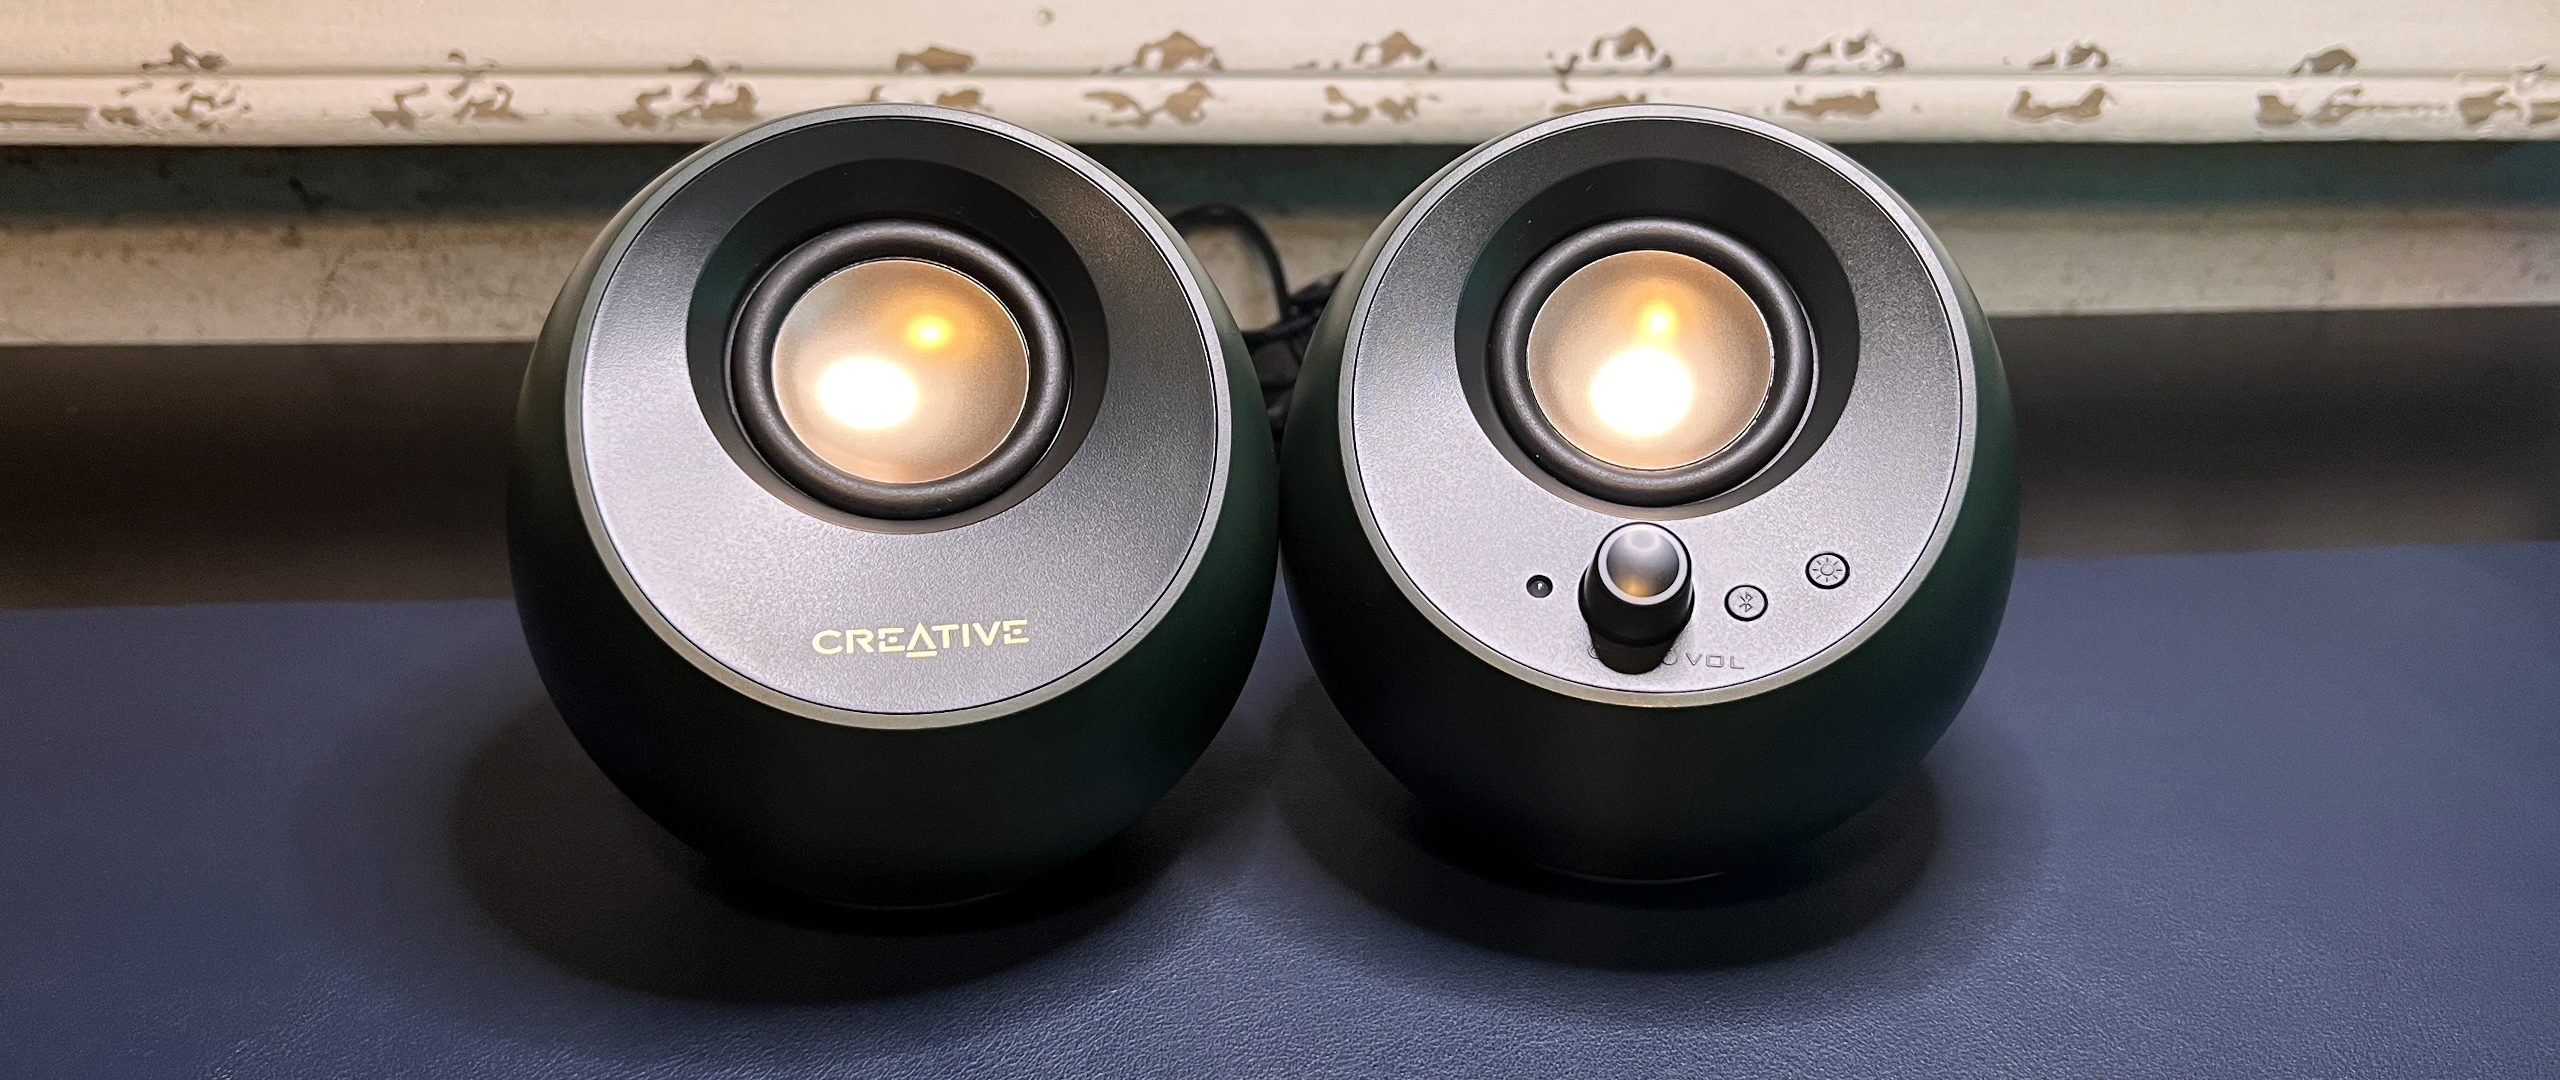 Creative Pebble Pro Review: Small and Mighty